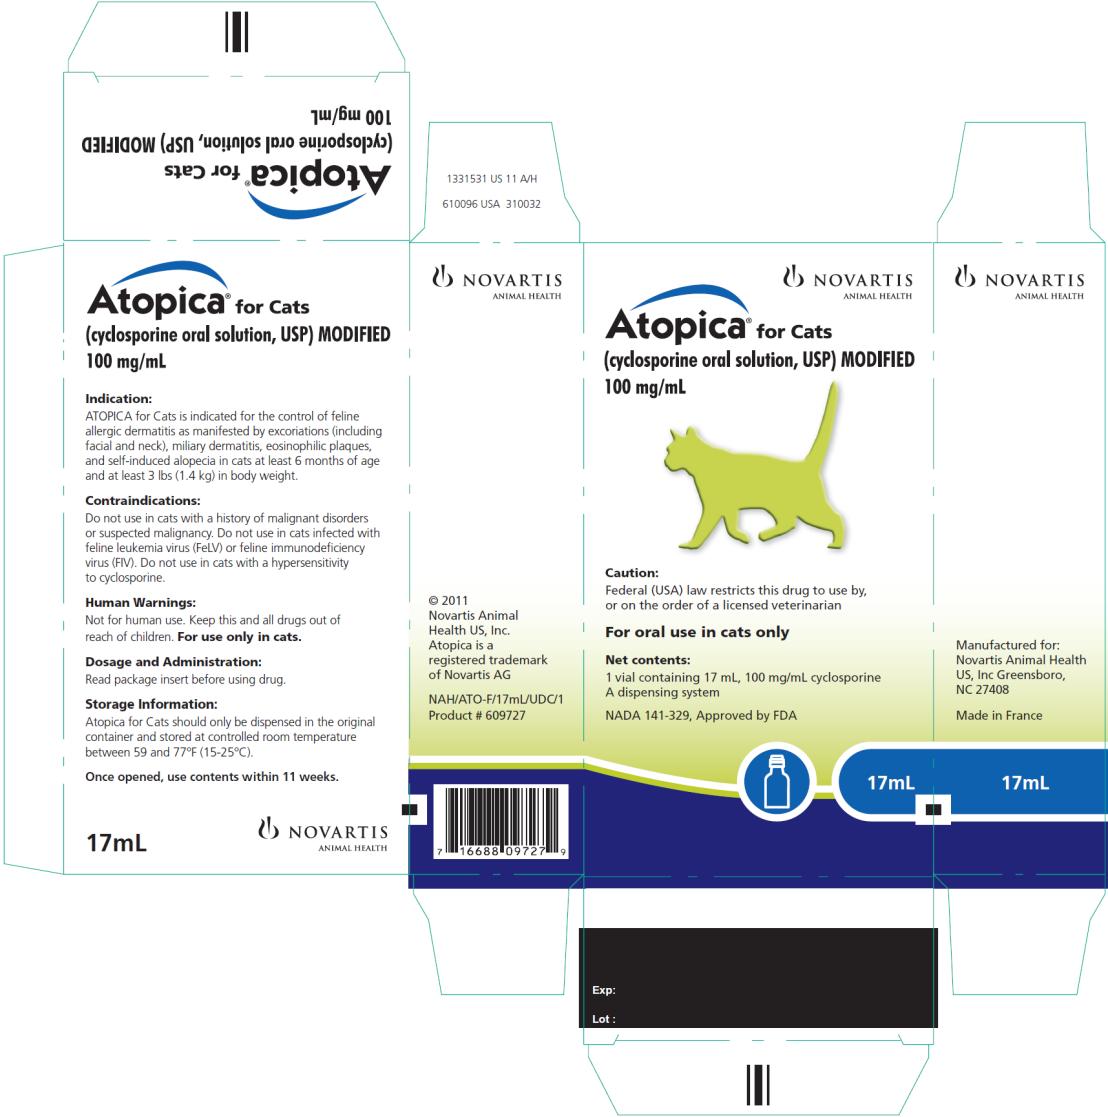 PRINCIPAL DISPLAY PANEL
NOVARTIS ANIMAL HEALTH
Atopica® for Cats
(cyclosporine oral solution, USP) MODIFIED
100 mg/mL
Caution:
Federal (USA) law restricts this drug to use by,
or on the order of a licensed veterinarian
For oral use in cats only
Net contents:
1 vial containing 17 mL, 100 mg/mL cyclosporine
A dispensing system
NADA 141-329, Approved by FDA
17mL
